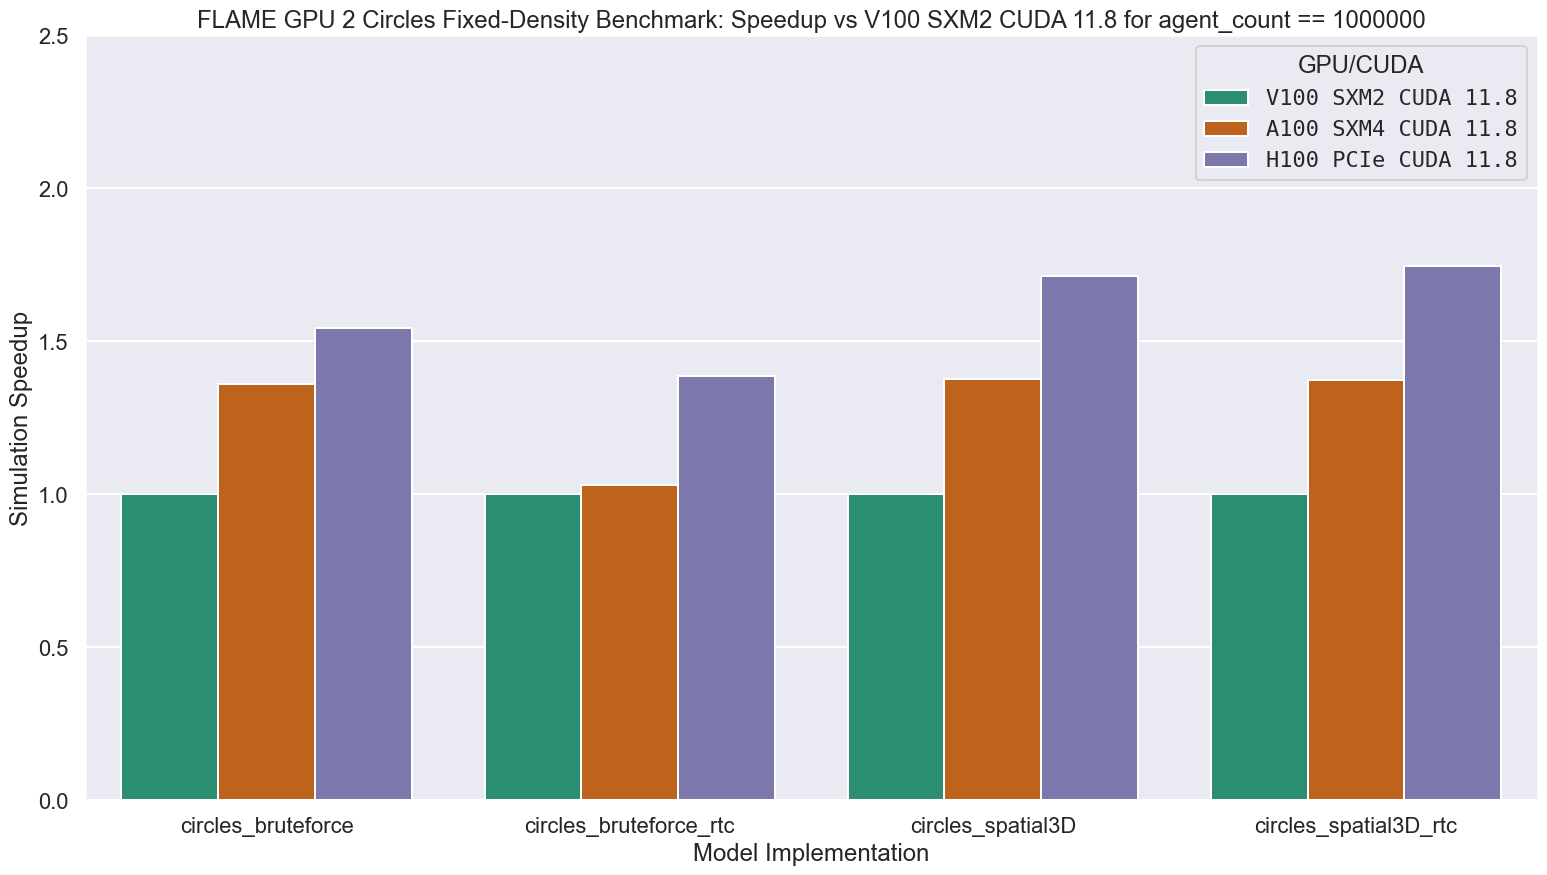 Cirlces fixed-density benchmark H100 and A100 speedup relative to V100